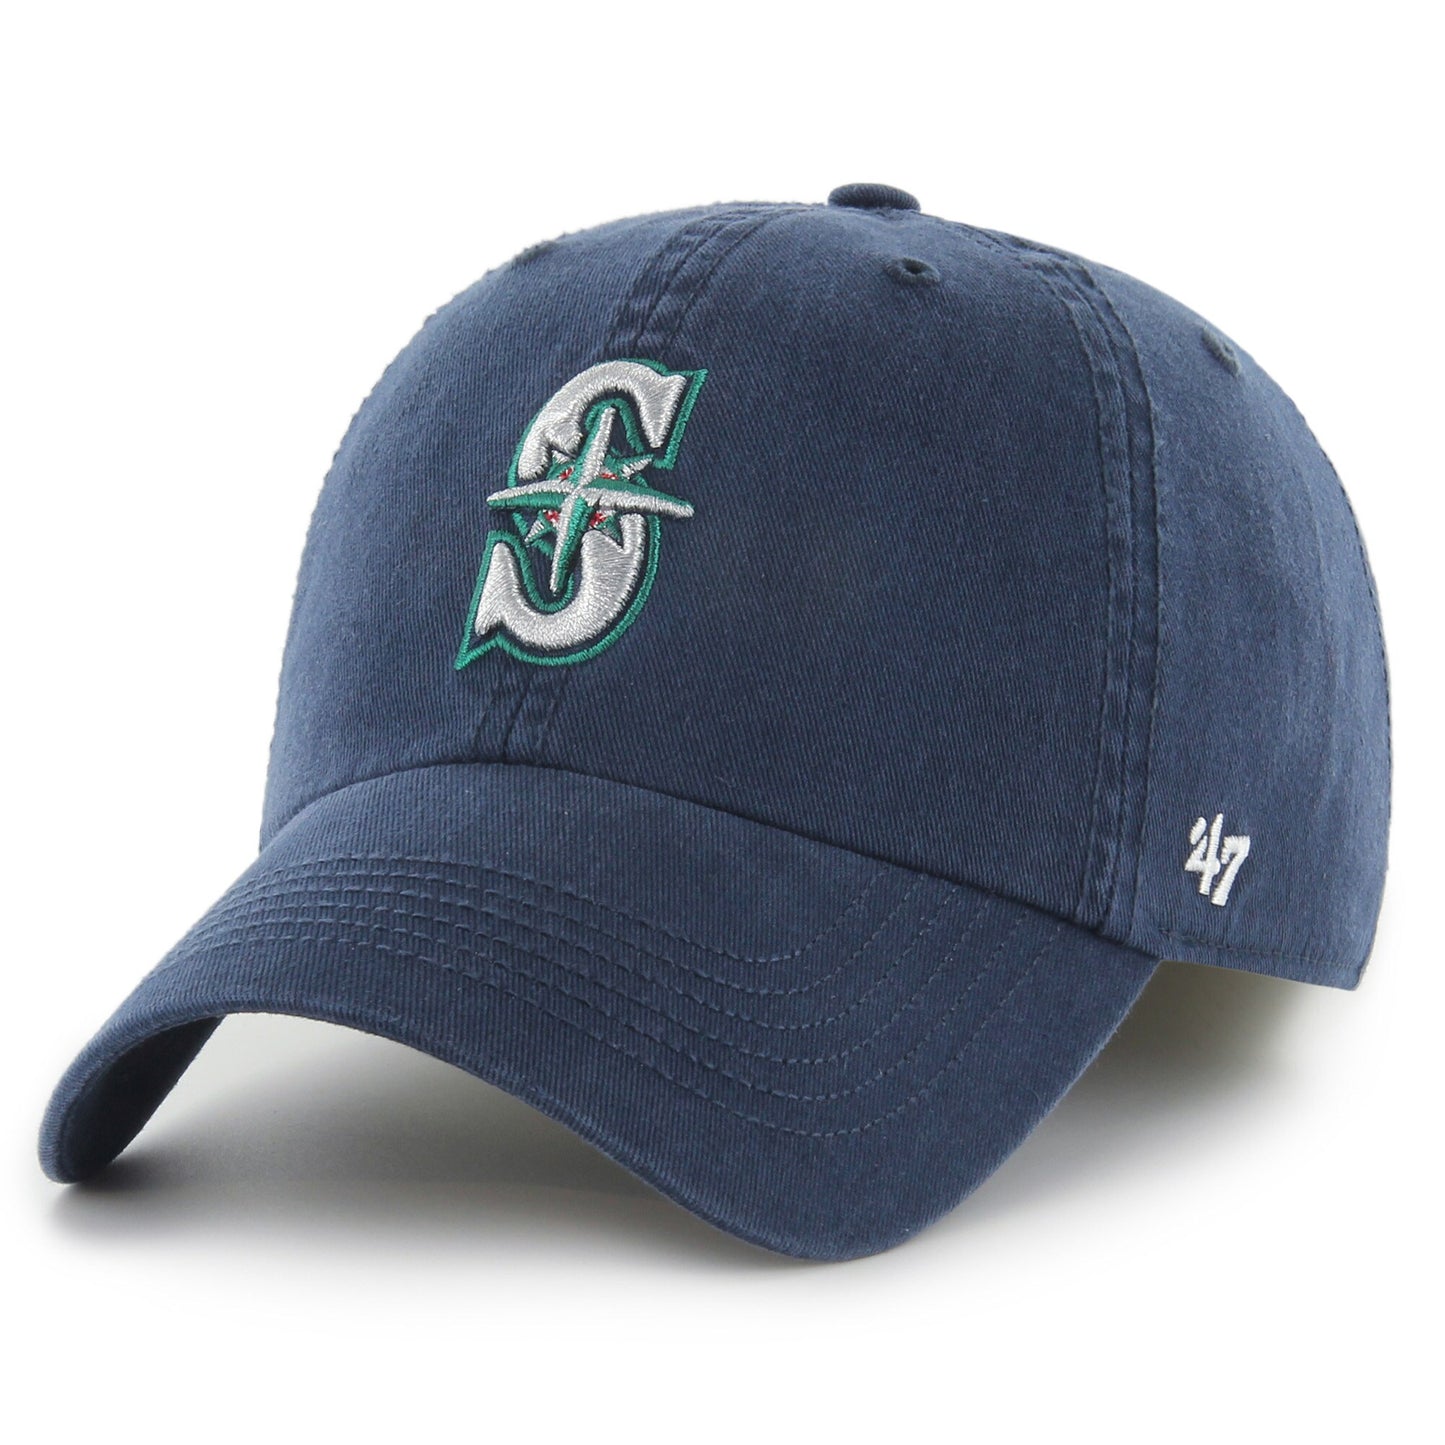 Seattle Mariners '47 Franchise Logo Fitted Hat - Navy